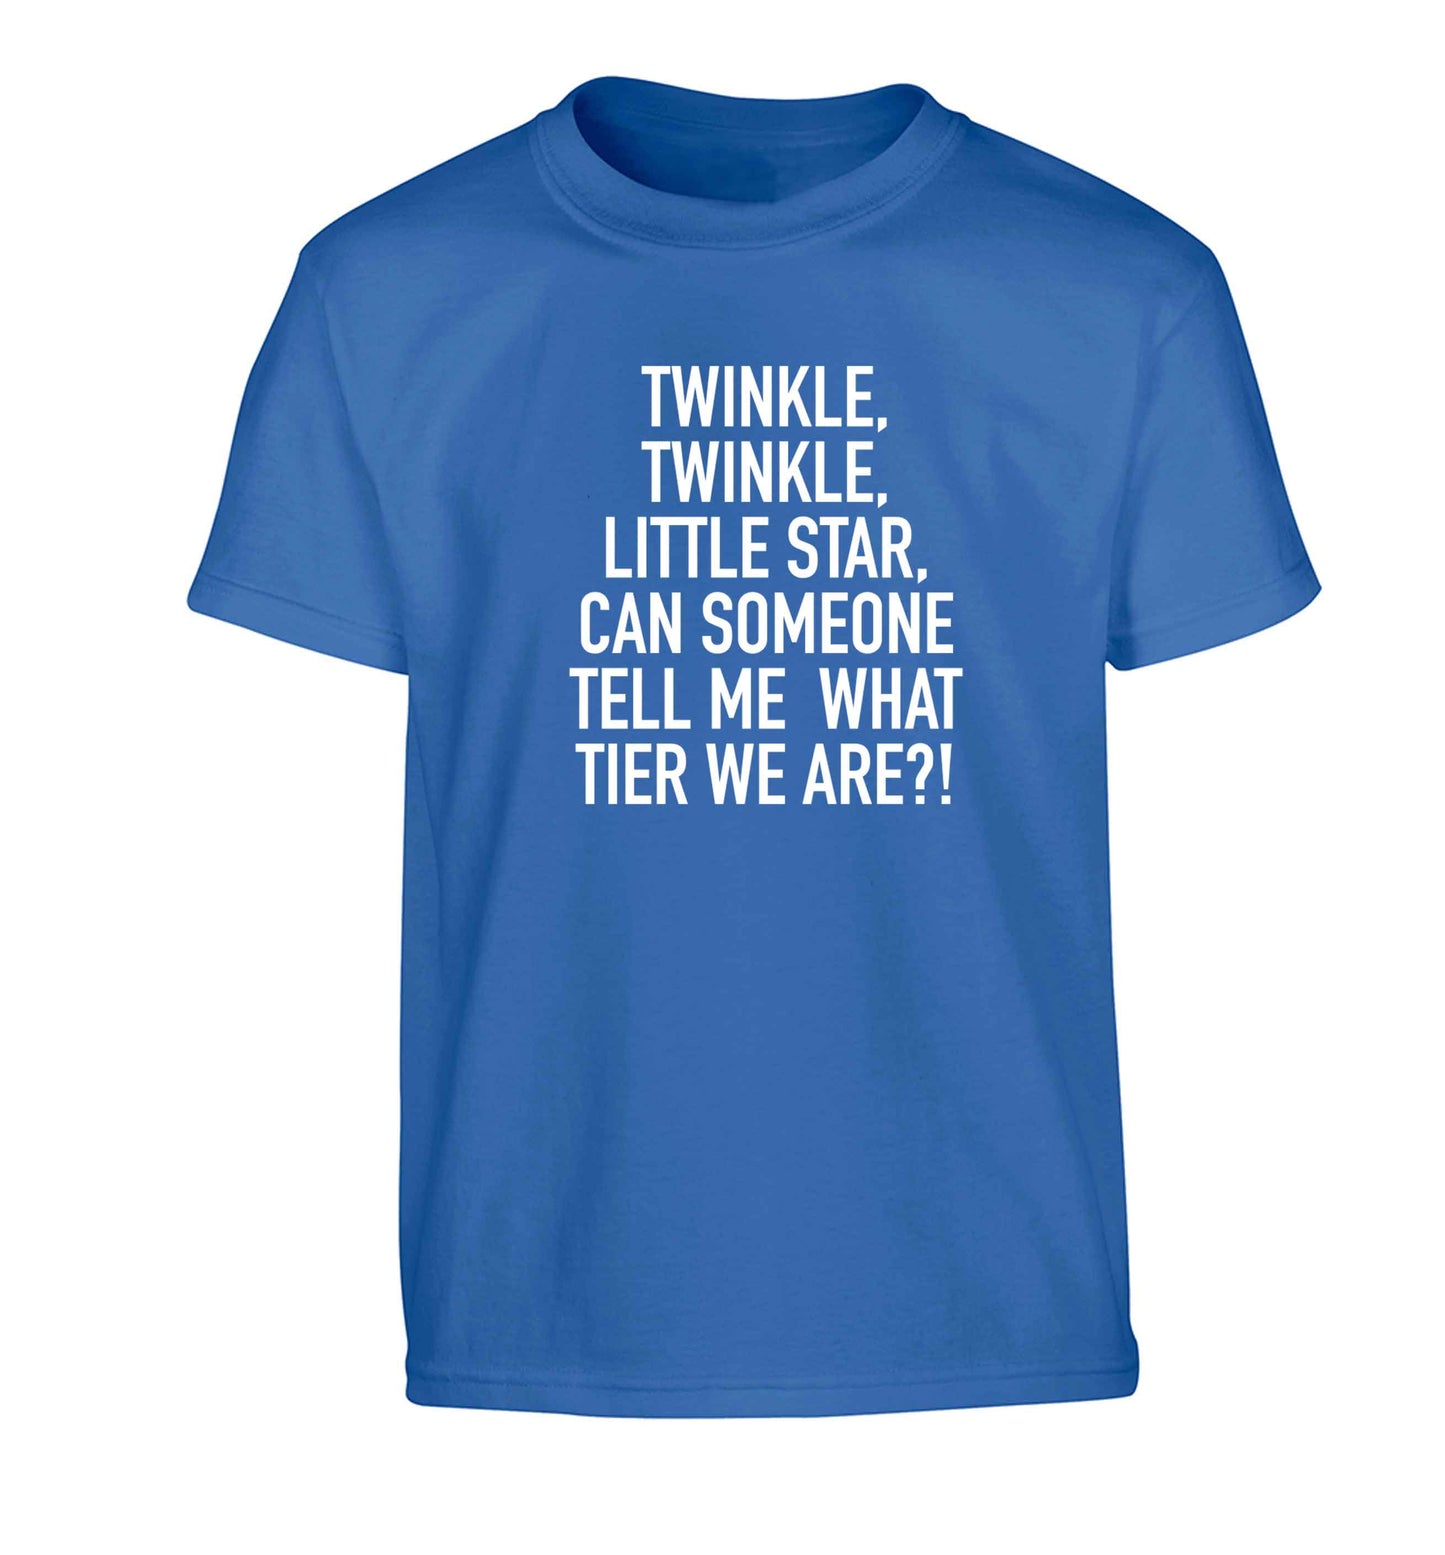 Twinkle twinkle, little star does anyone know what tier we are? Children's blue Tshirt 12-13 Years